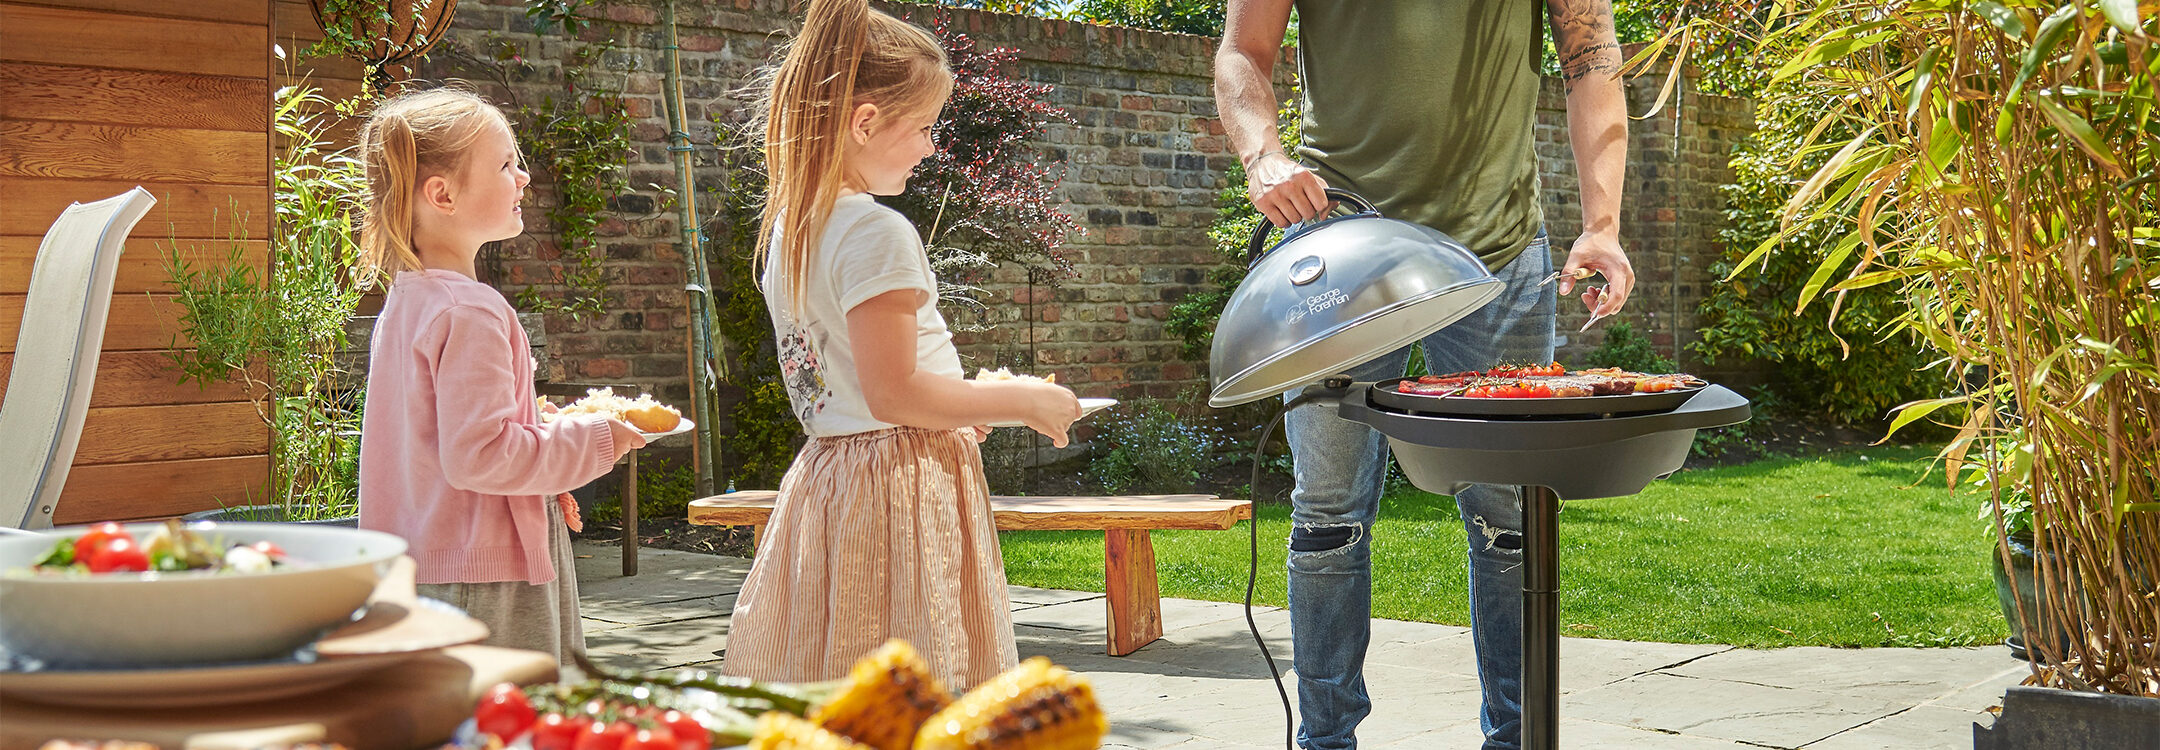 Win an indoor/outdoor grill from George Foreman